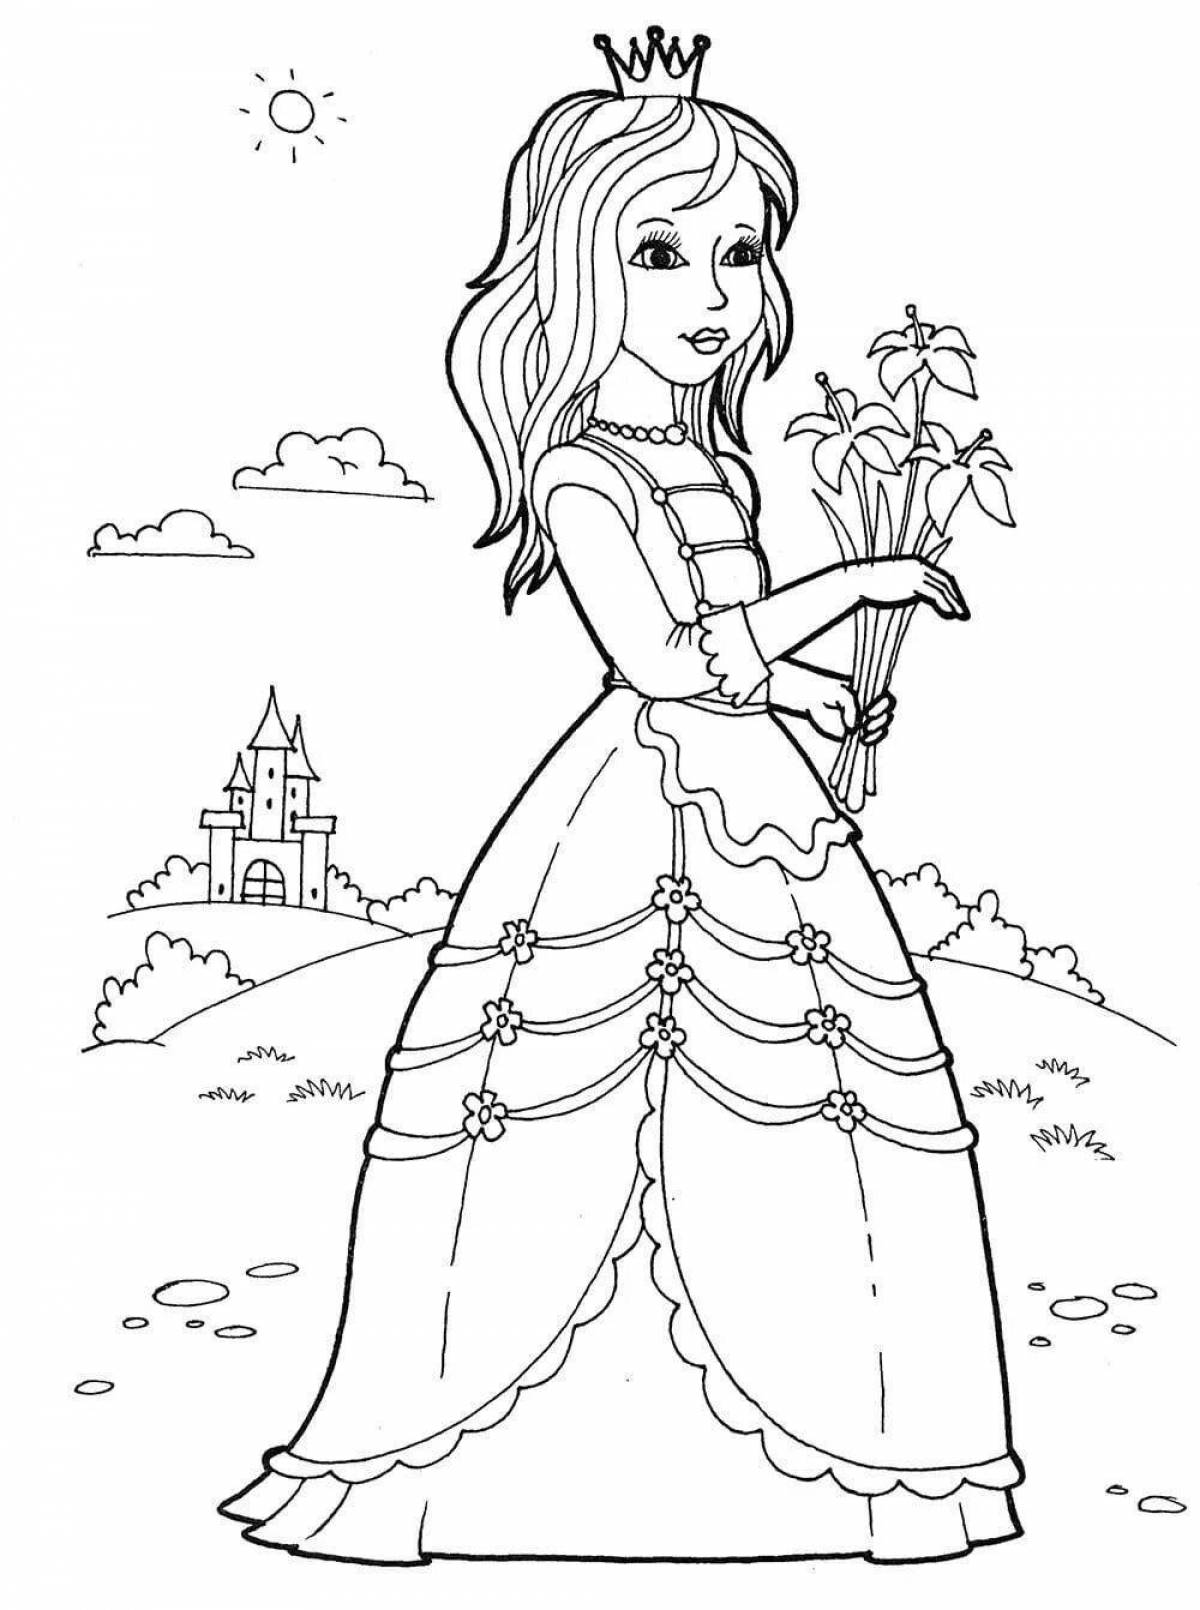 Great coloring book for girls 6 years old